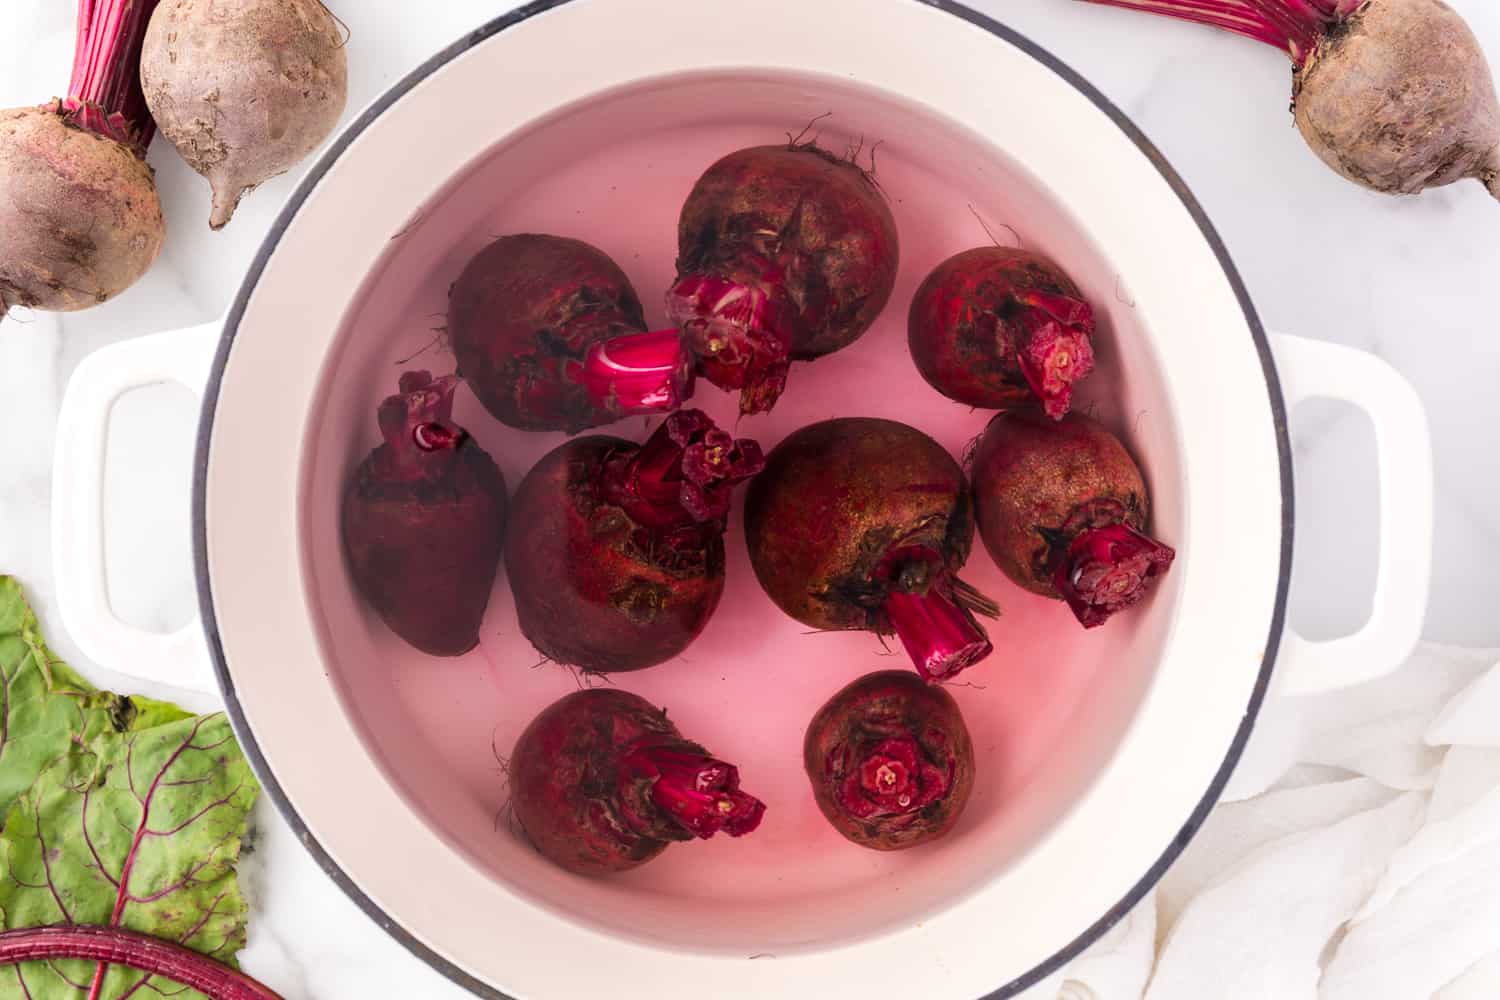 Beets in water, before cooking.